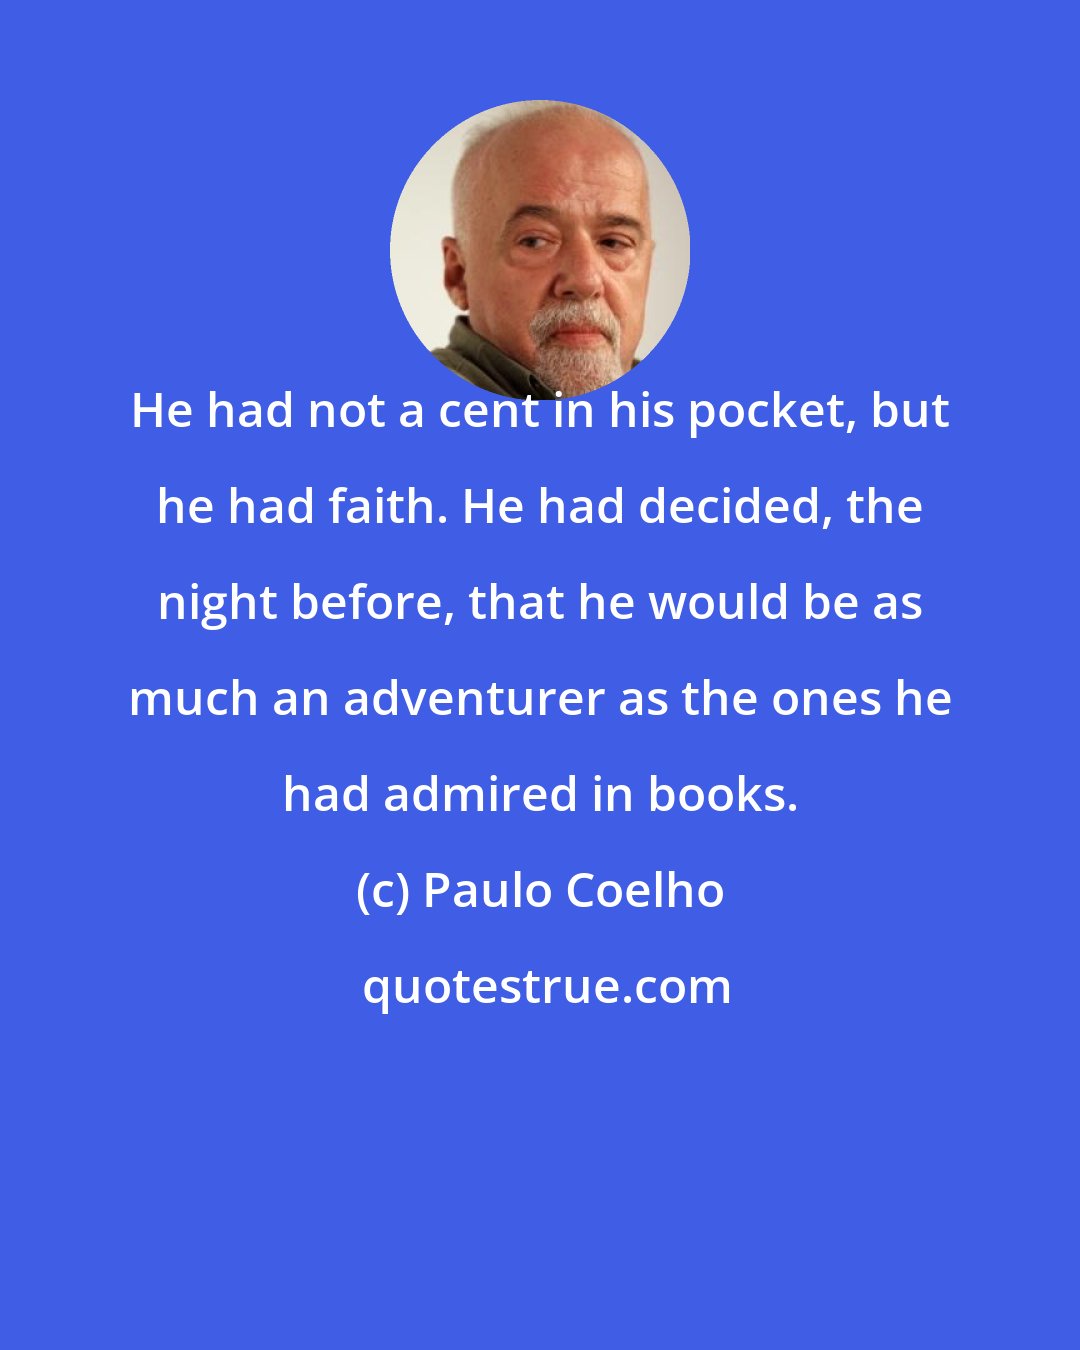 Paulo Coelho: He had not a cent in his pocket, but he had faith. He had decided, the night before, that he would be as much an adventurer as the ones he had admired in books.